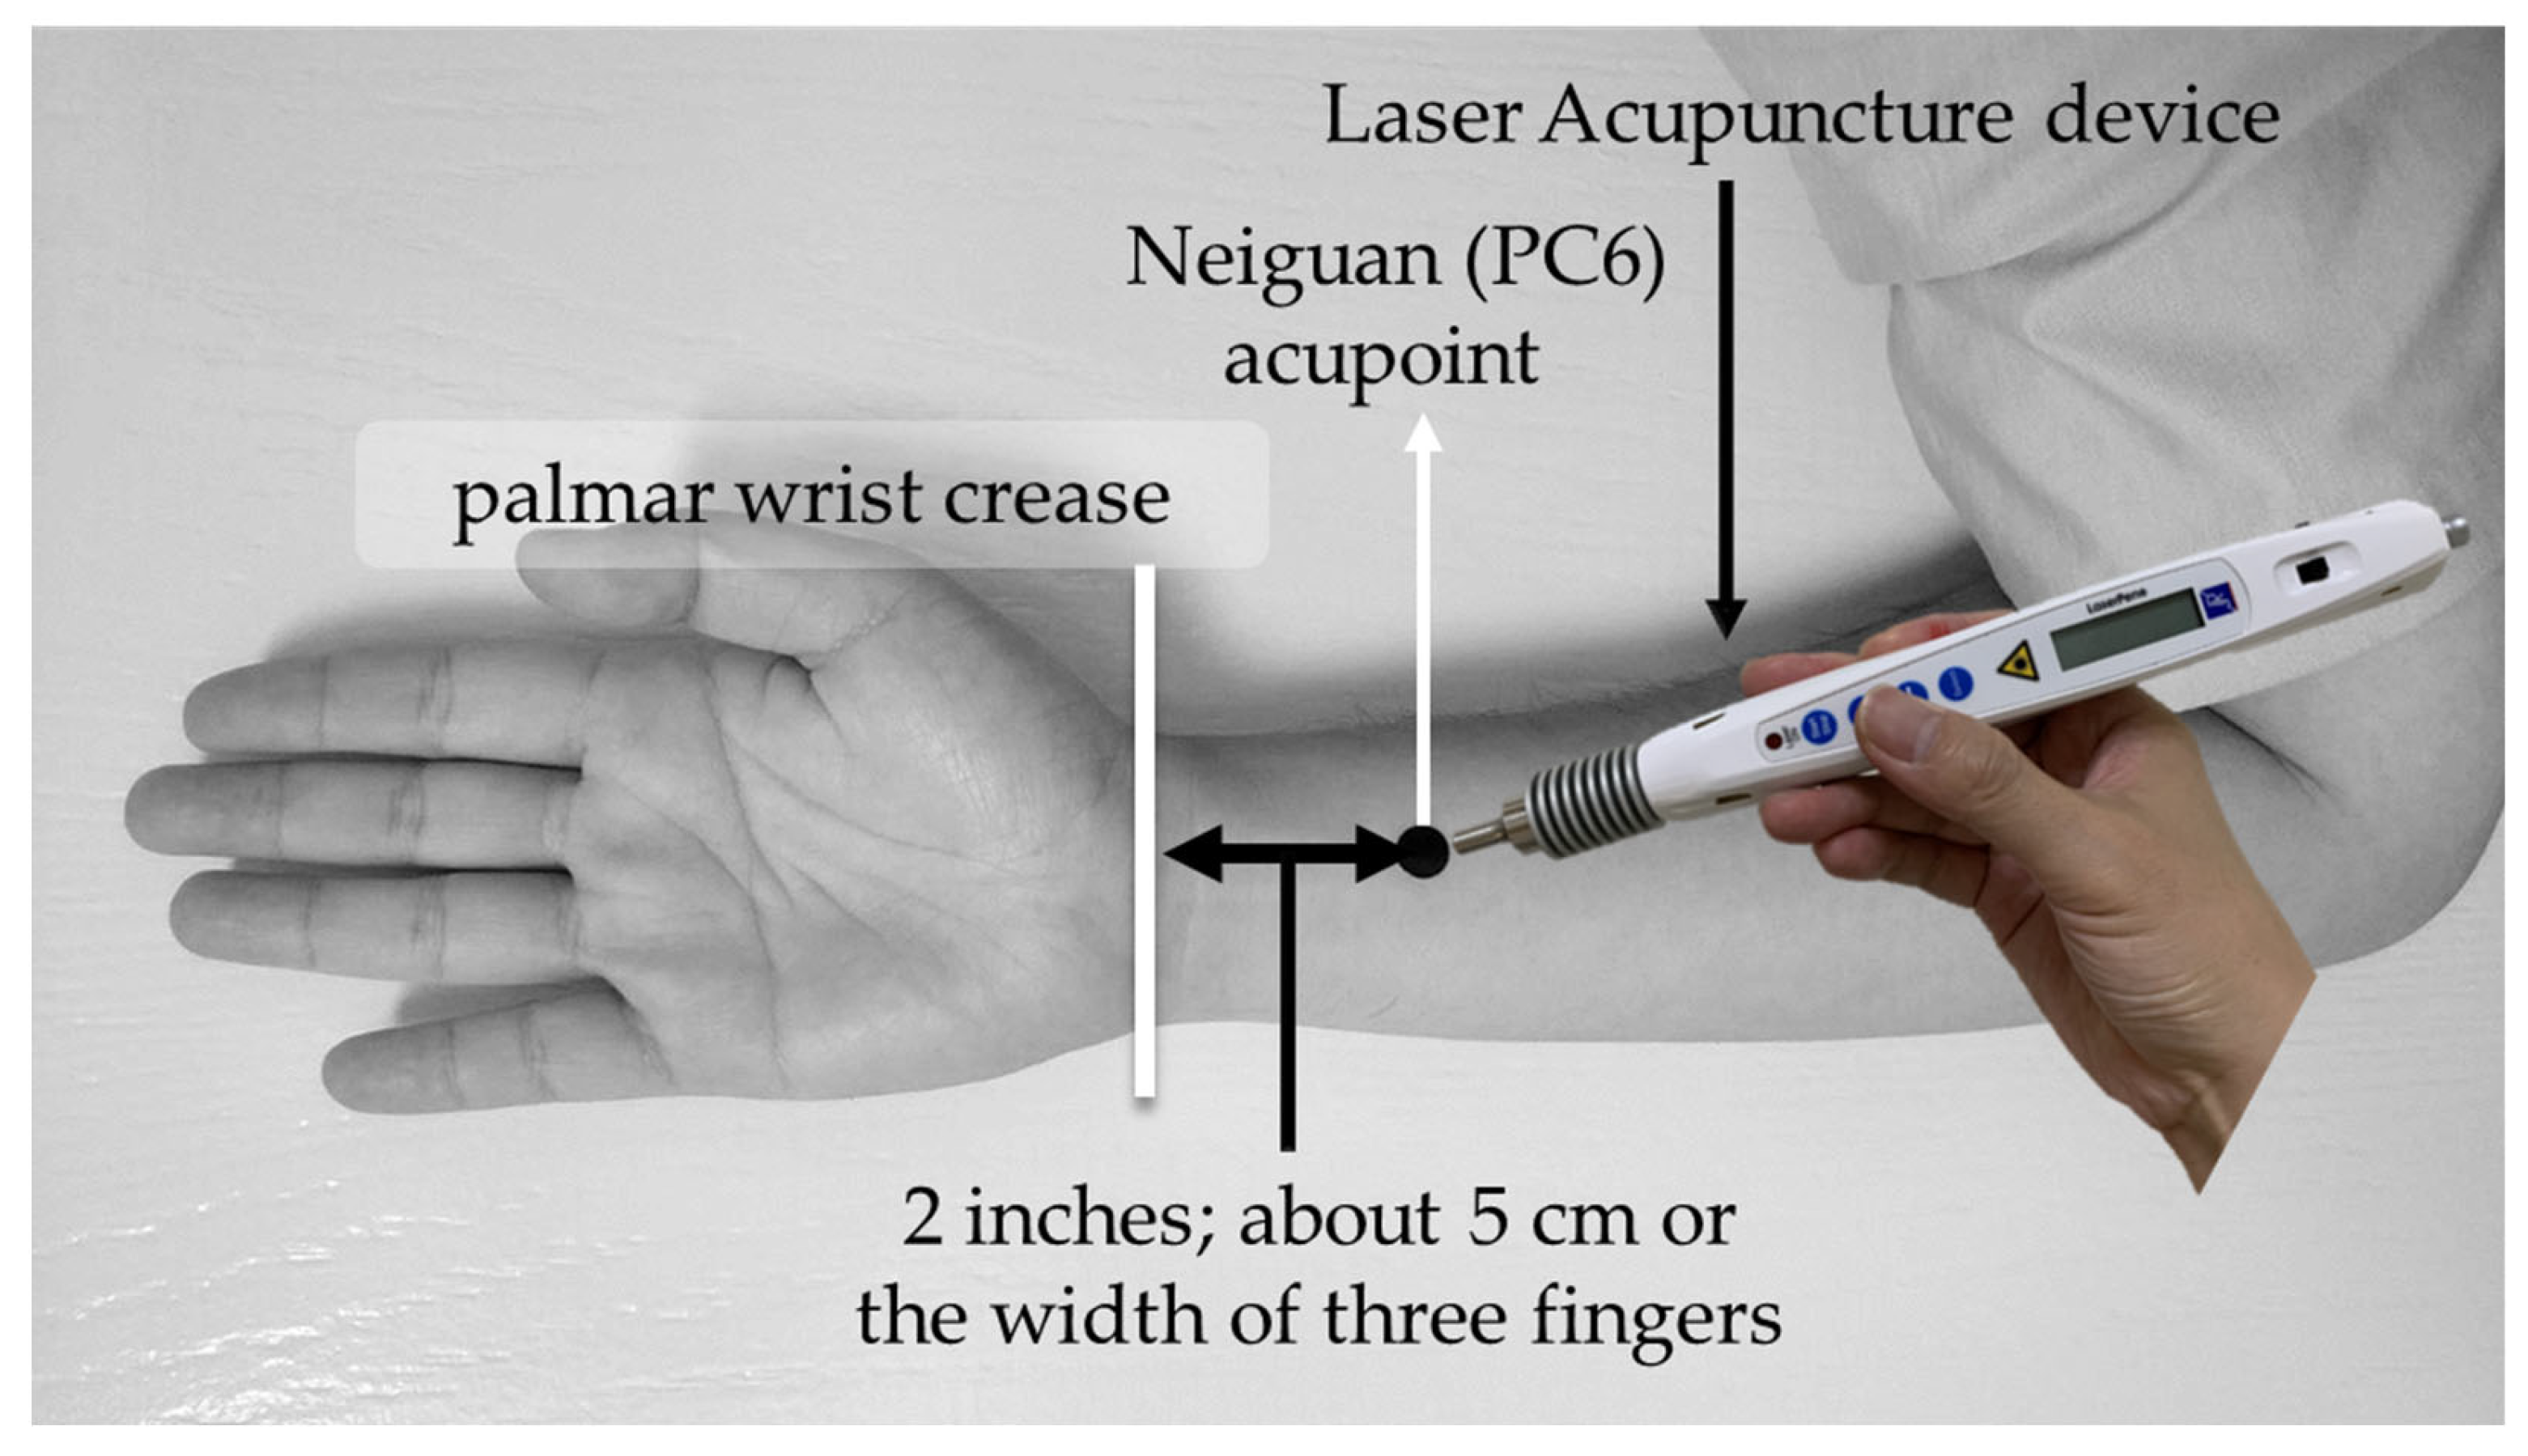 Life | Free Full-Text | The Dosage Effect of Laser Acupuncture at PC6  (Neiguan) on Heart Rate Variability: A Pilot Study